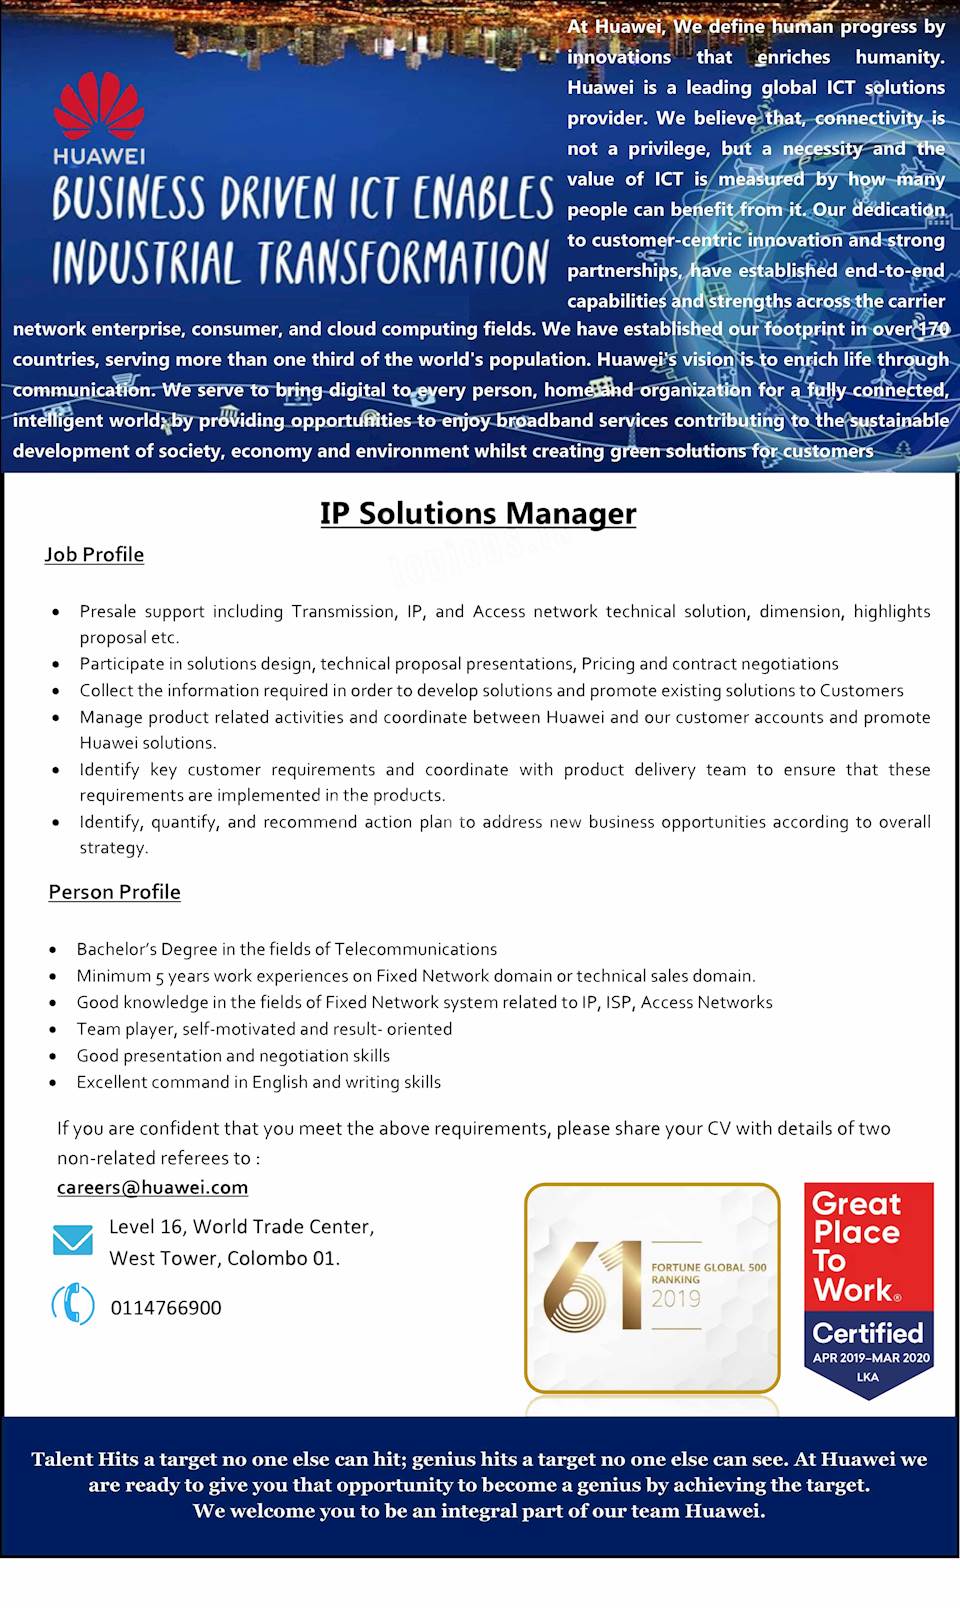 IP Solutions Manager